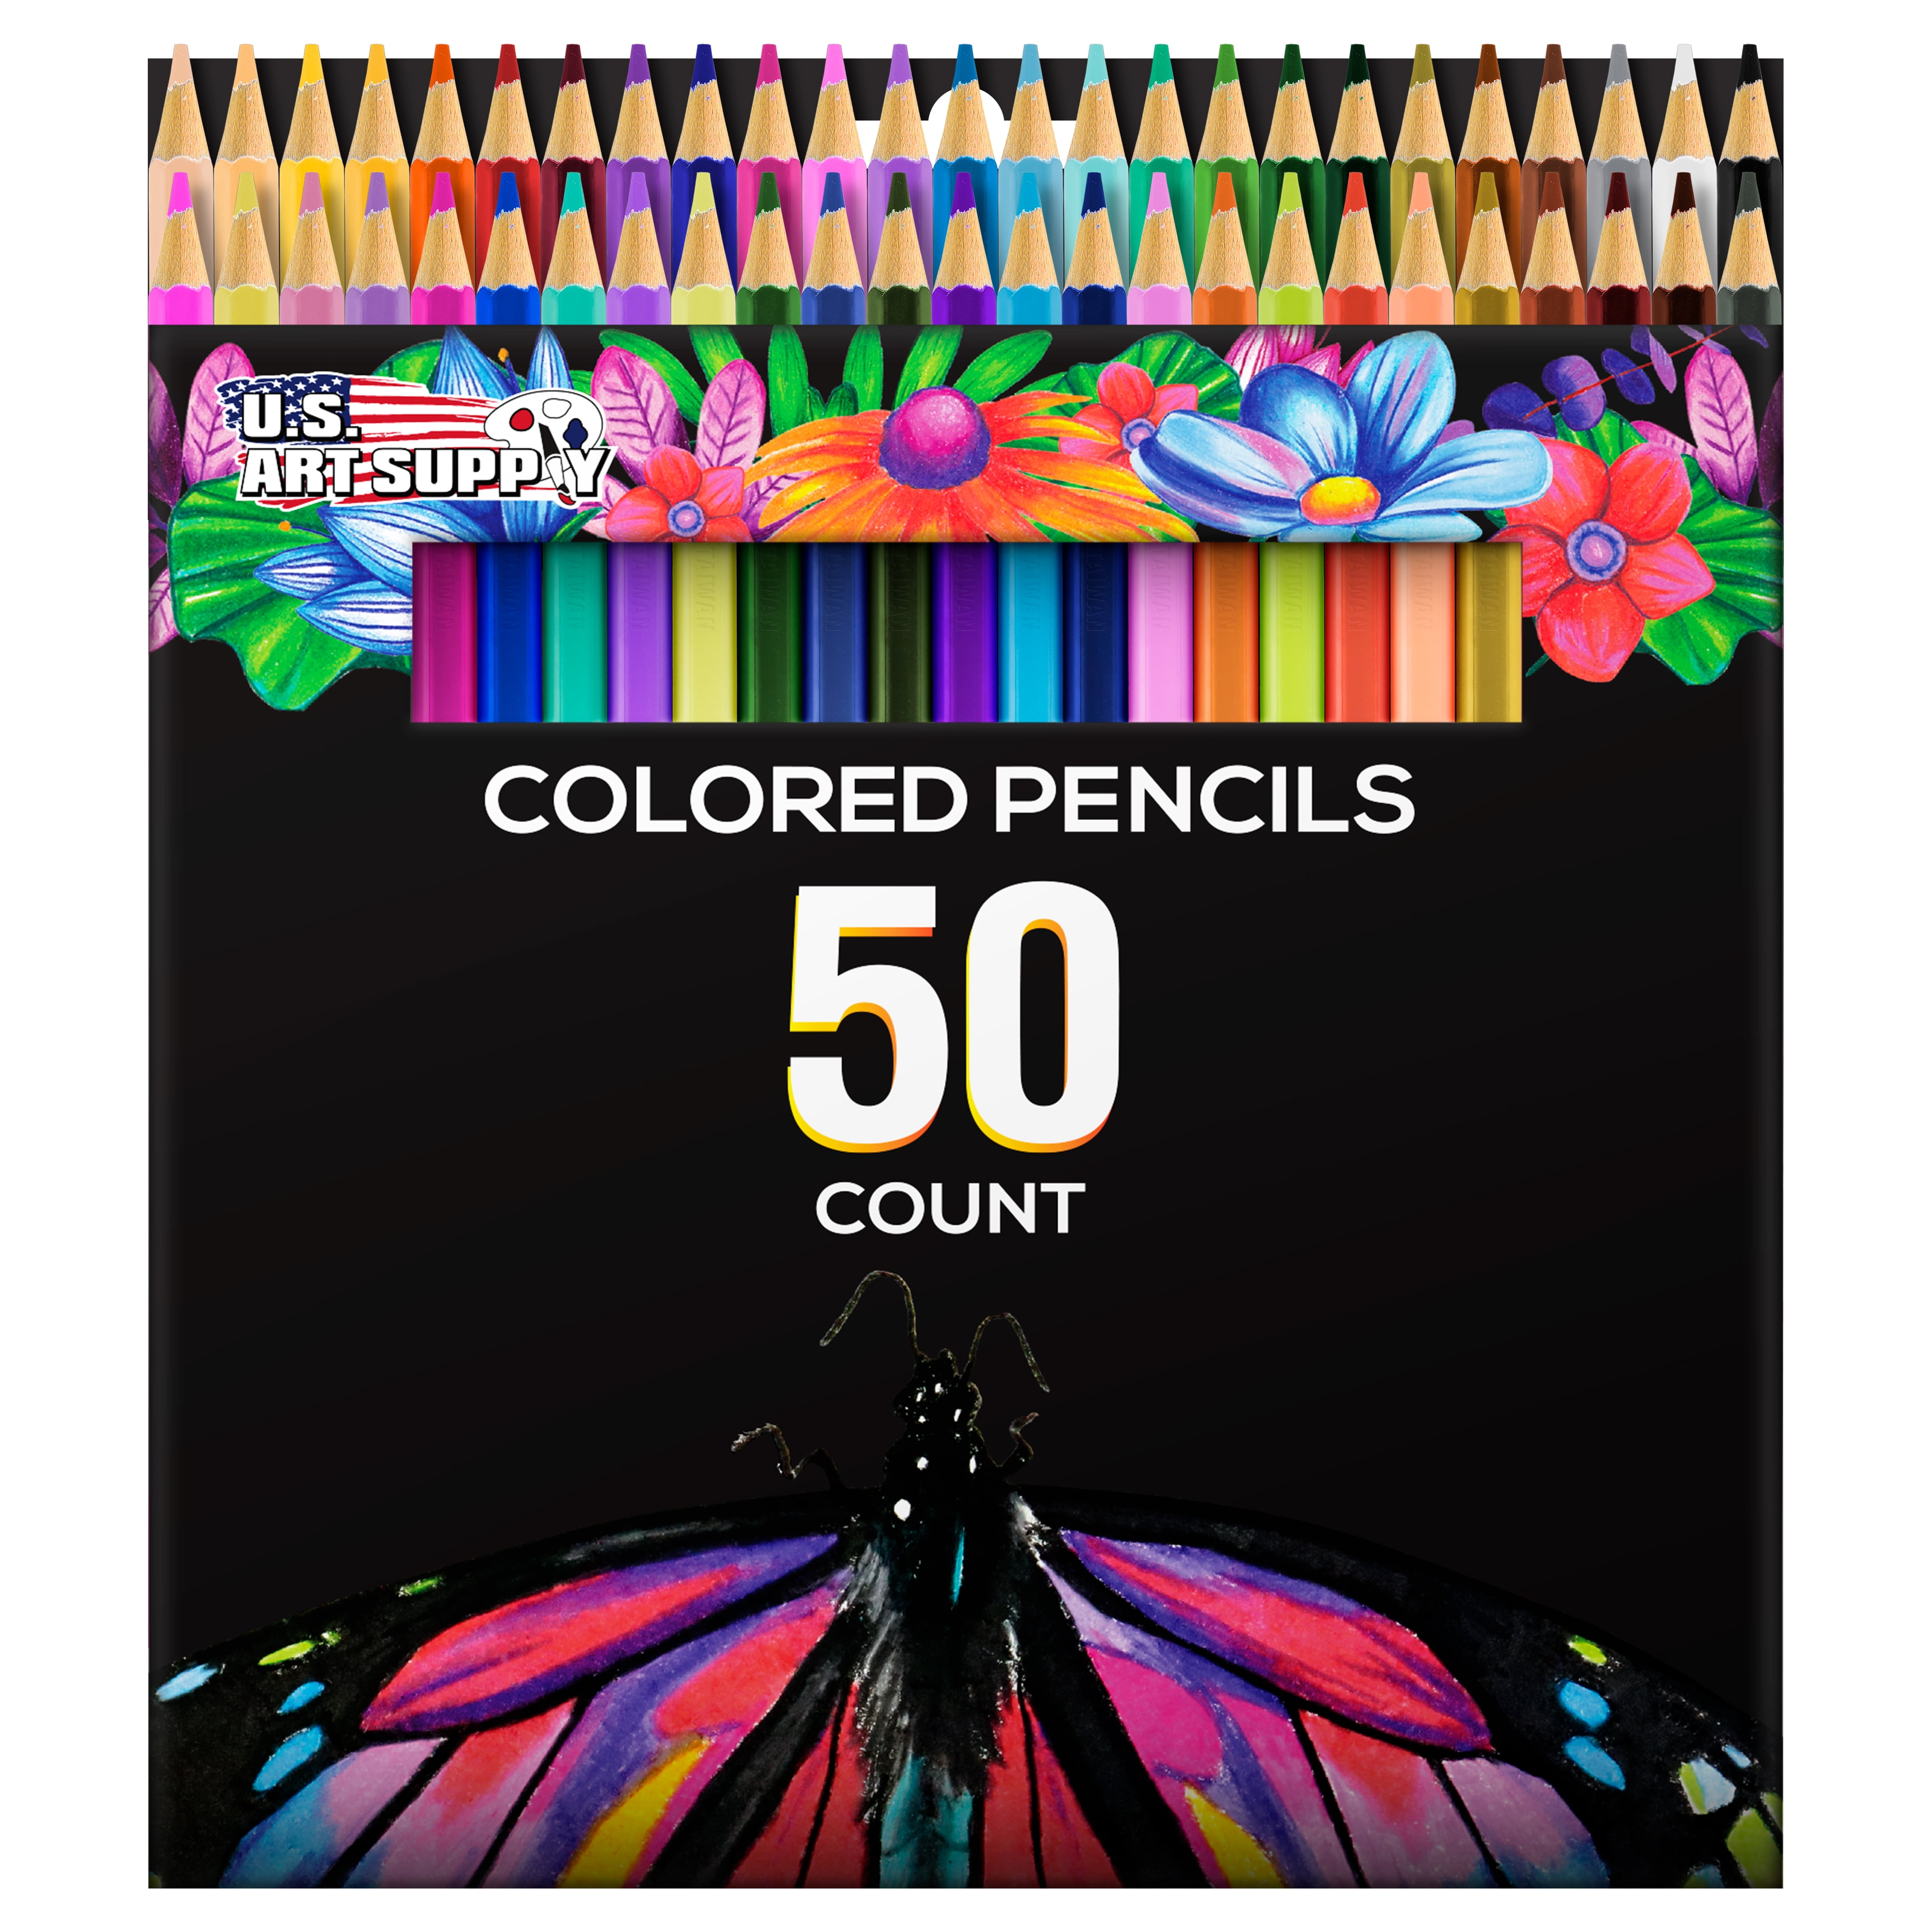 72 Colored Pencils for Adult Coloring Book, Coloring Pencils Set, Artist  Soft Core Oil based Color Pencil Sets, Included Sharpener, Handmade Canvas  Pencil Wrap, Coloring Book, Erasers 